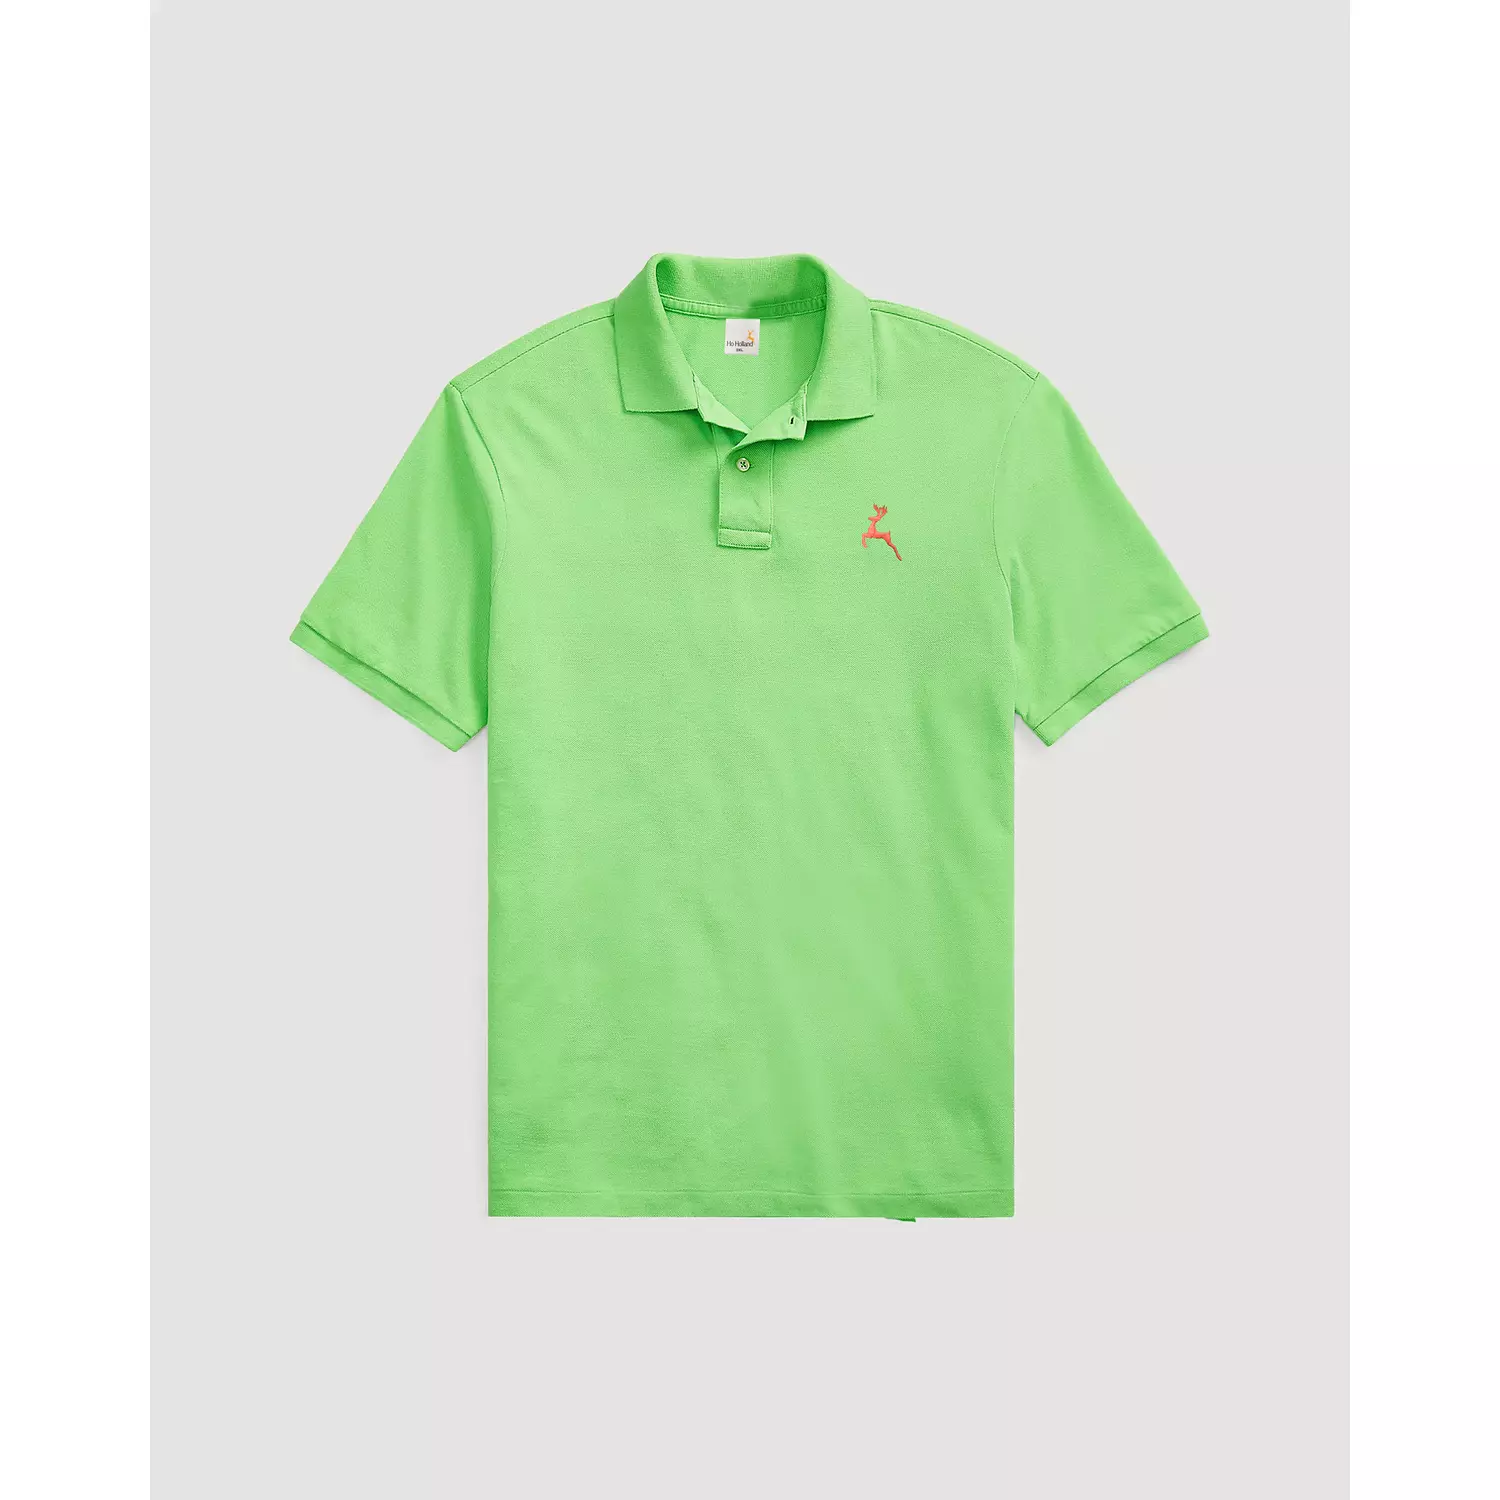 Polo T shirt - Phosphoric hover image